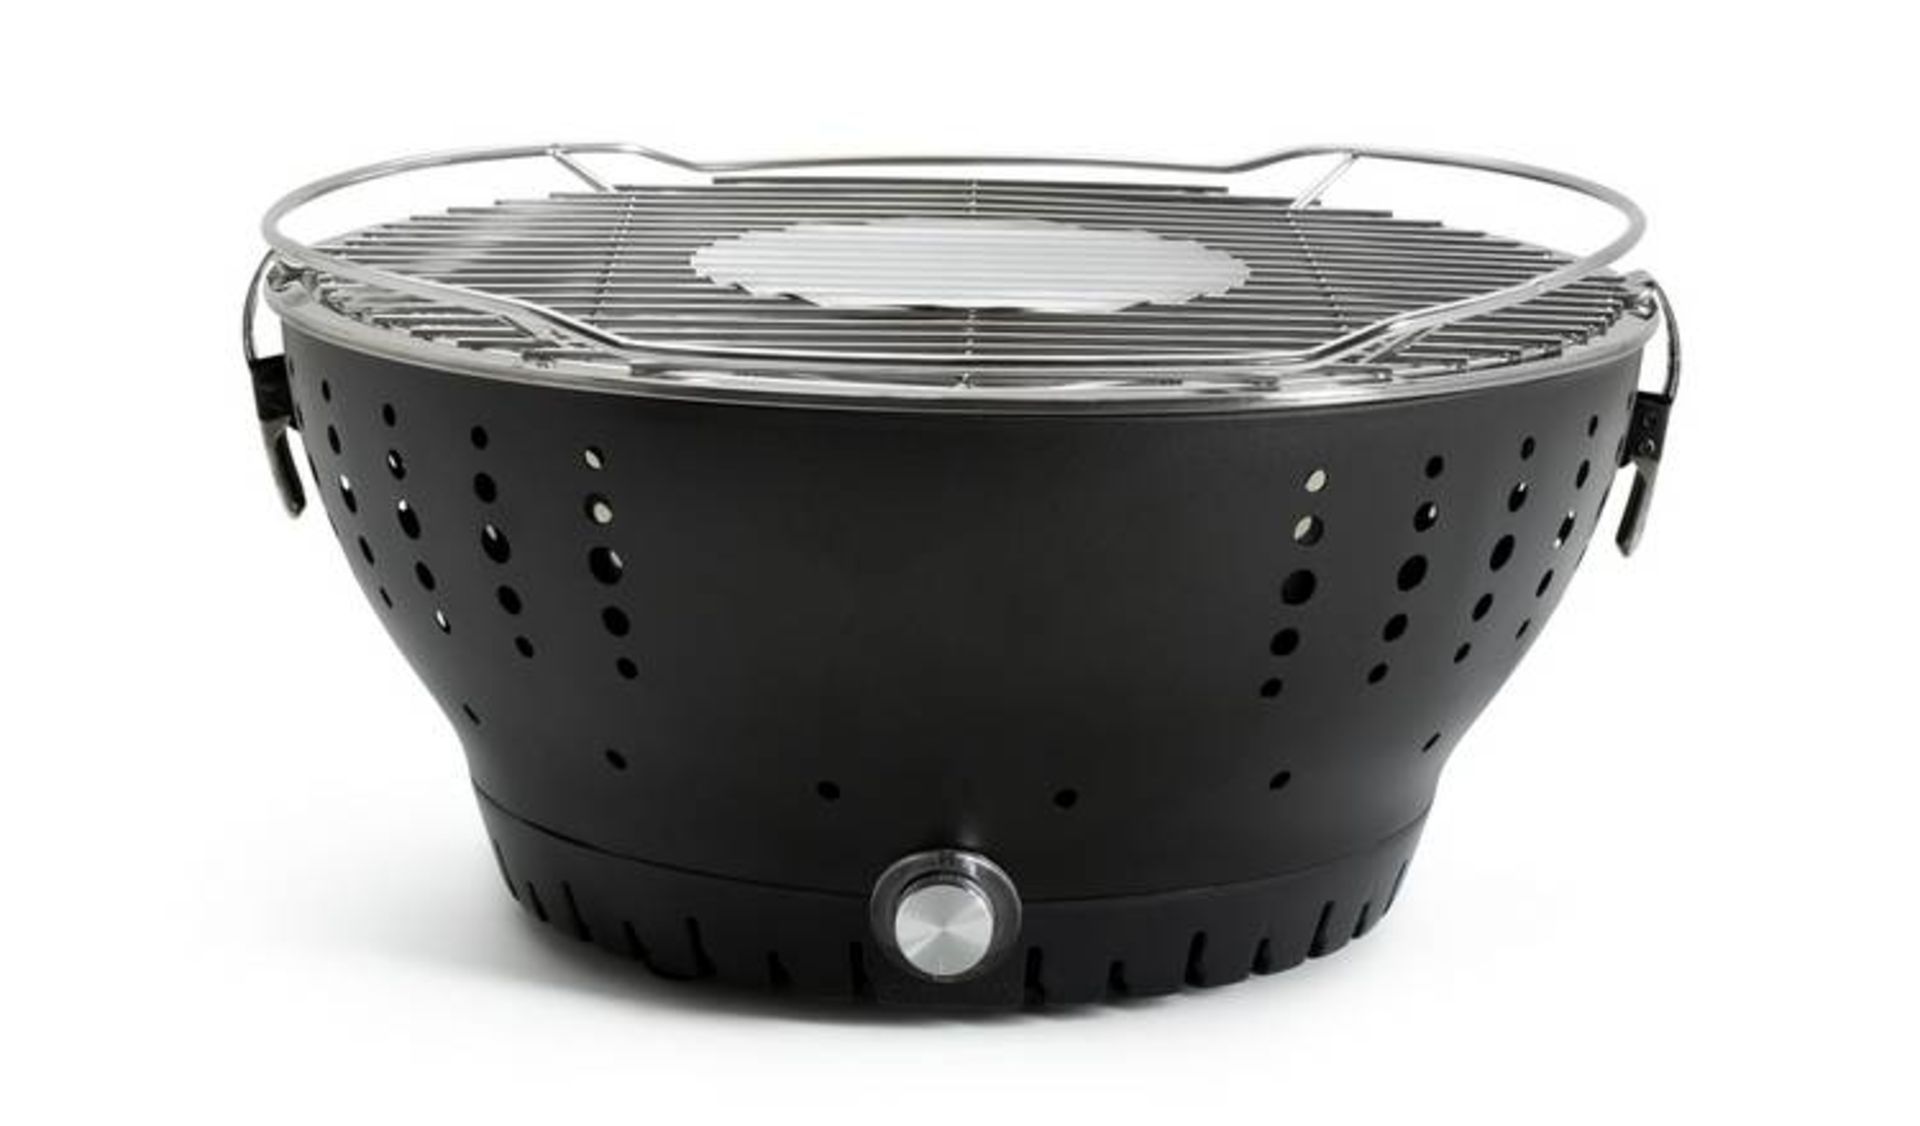 TRADE LOT 16 X BRAND NEW 38CM PREMIUM CHARCOAL BBQ WITH BUILT IN FANS RRP £89 EACH